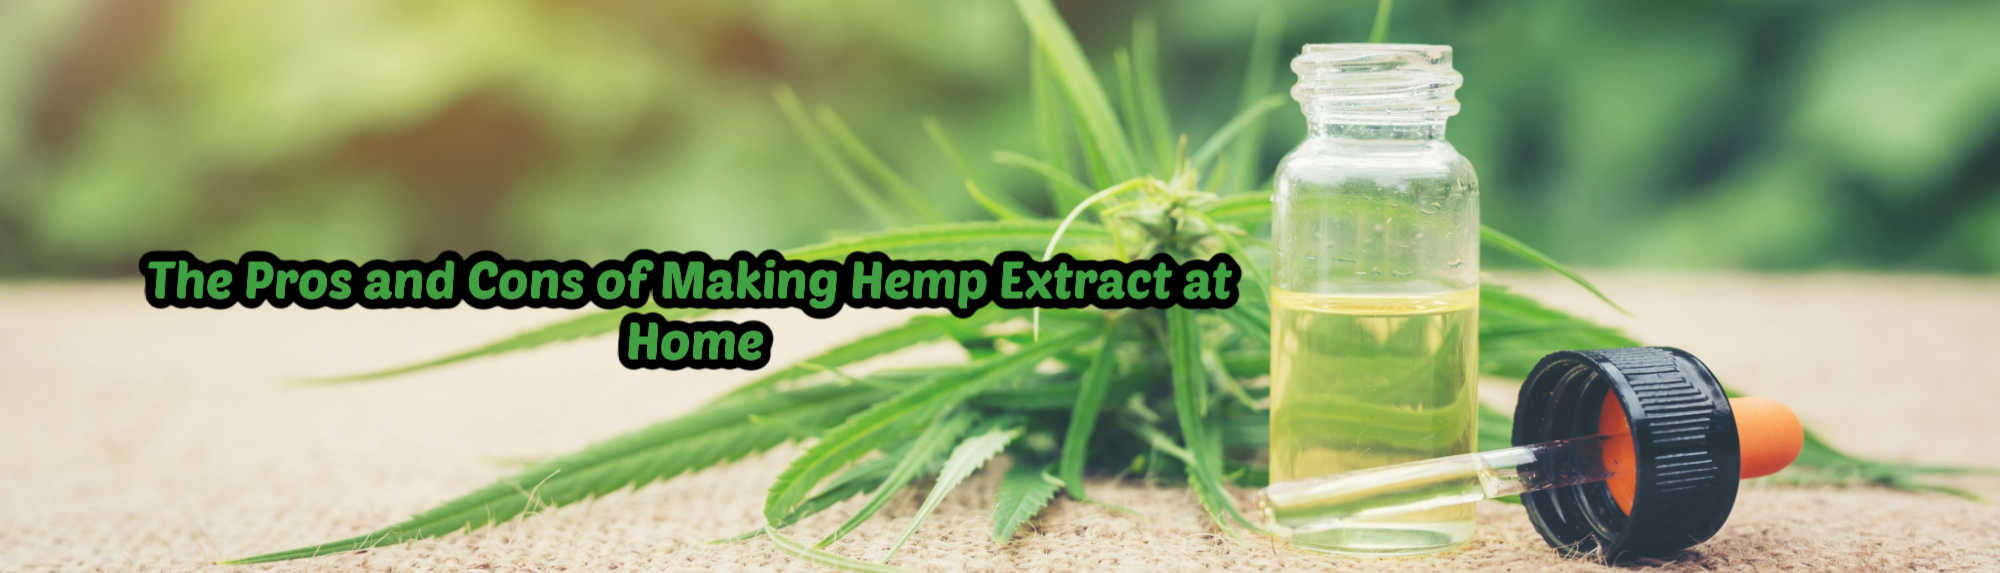 image of pros and cons of making hemp extract at home